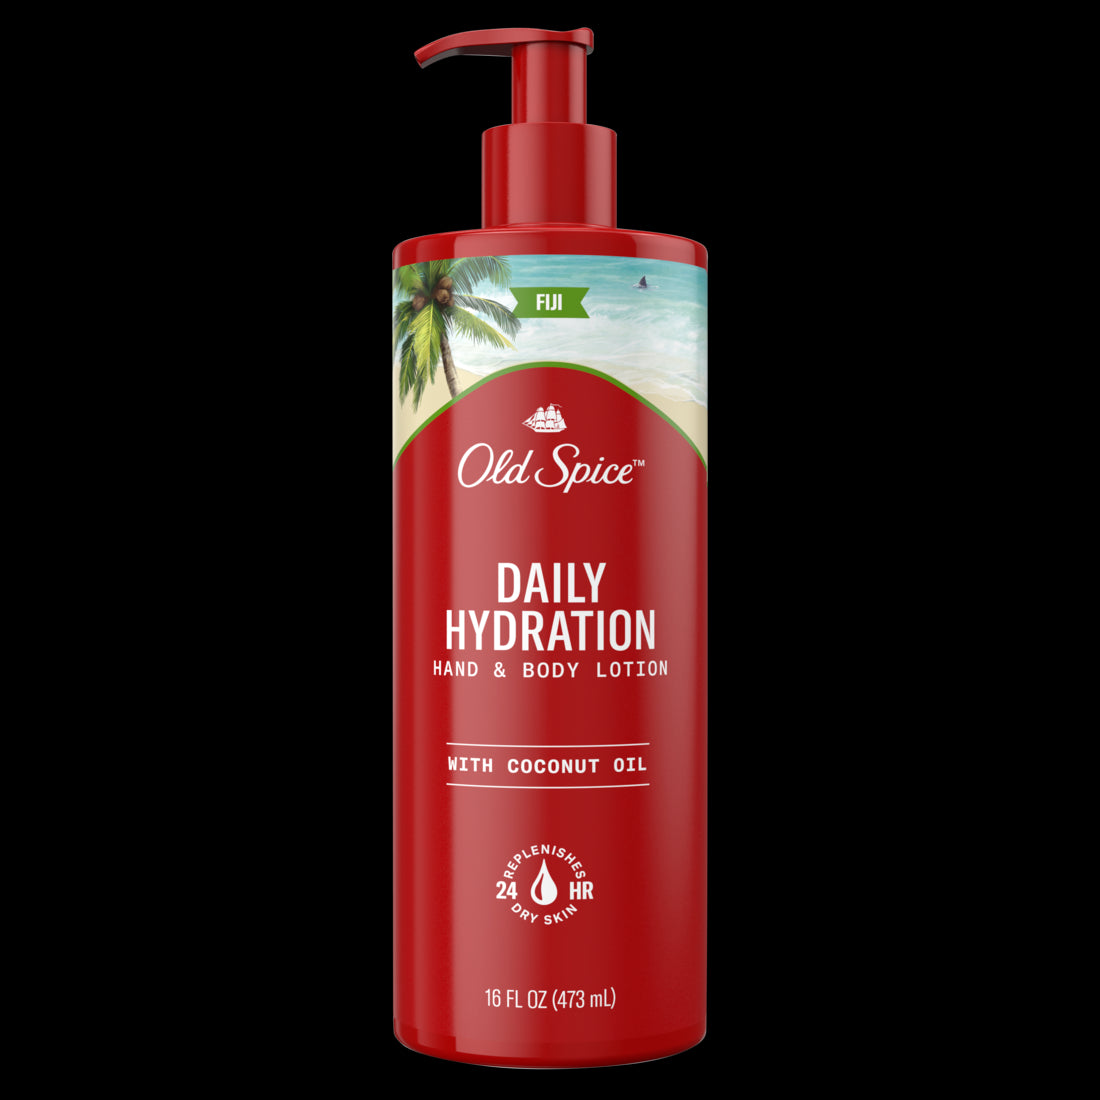 Old Spice Daily Hydration Hand & Body Lotion for Men Fiji with Coconut Oil-16oz/4pk